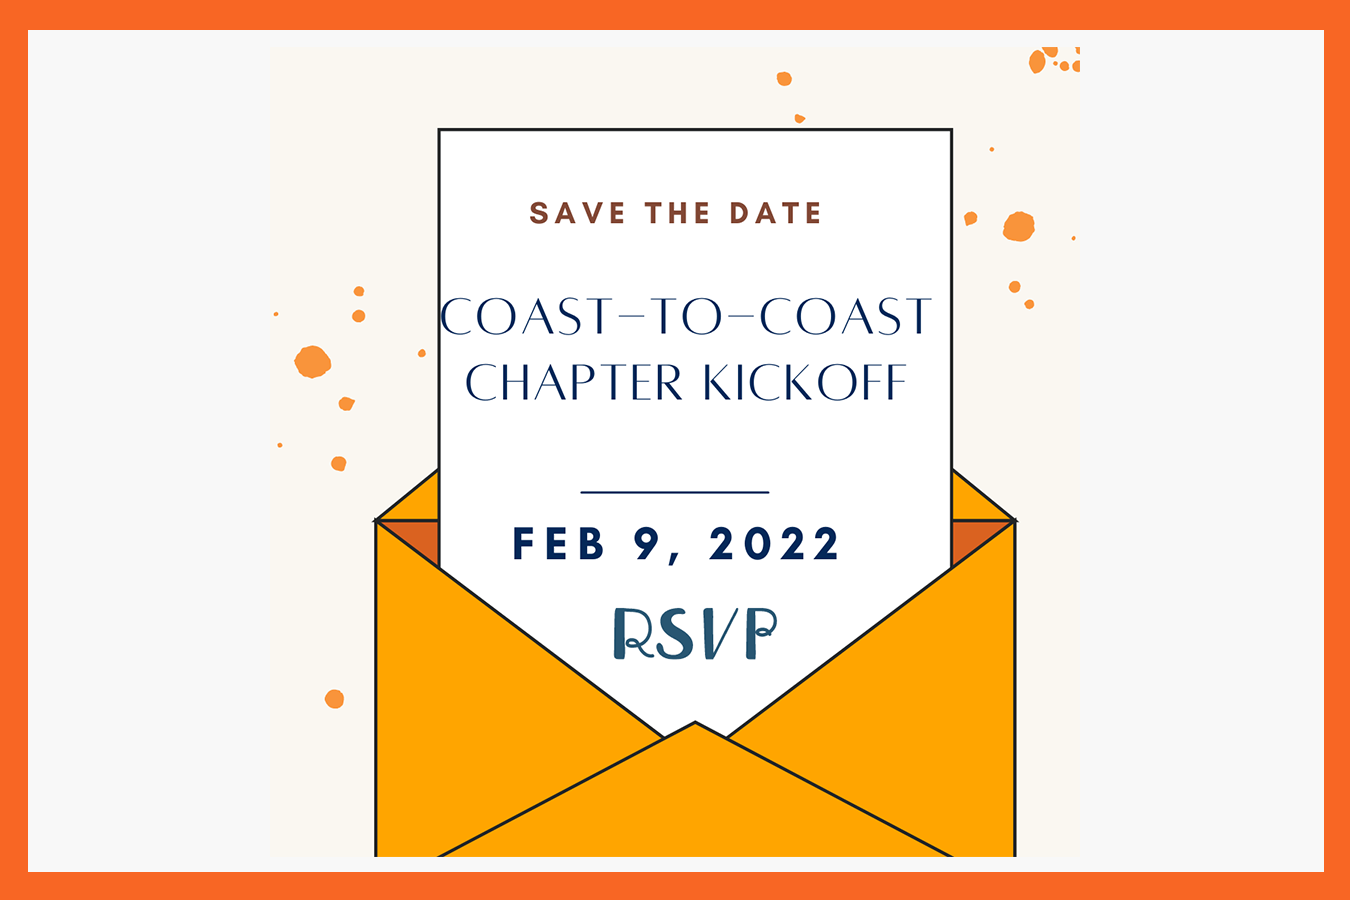 EPIP Save the Date Coast to Coast Chapter Kickoff February 9, 2022